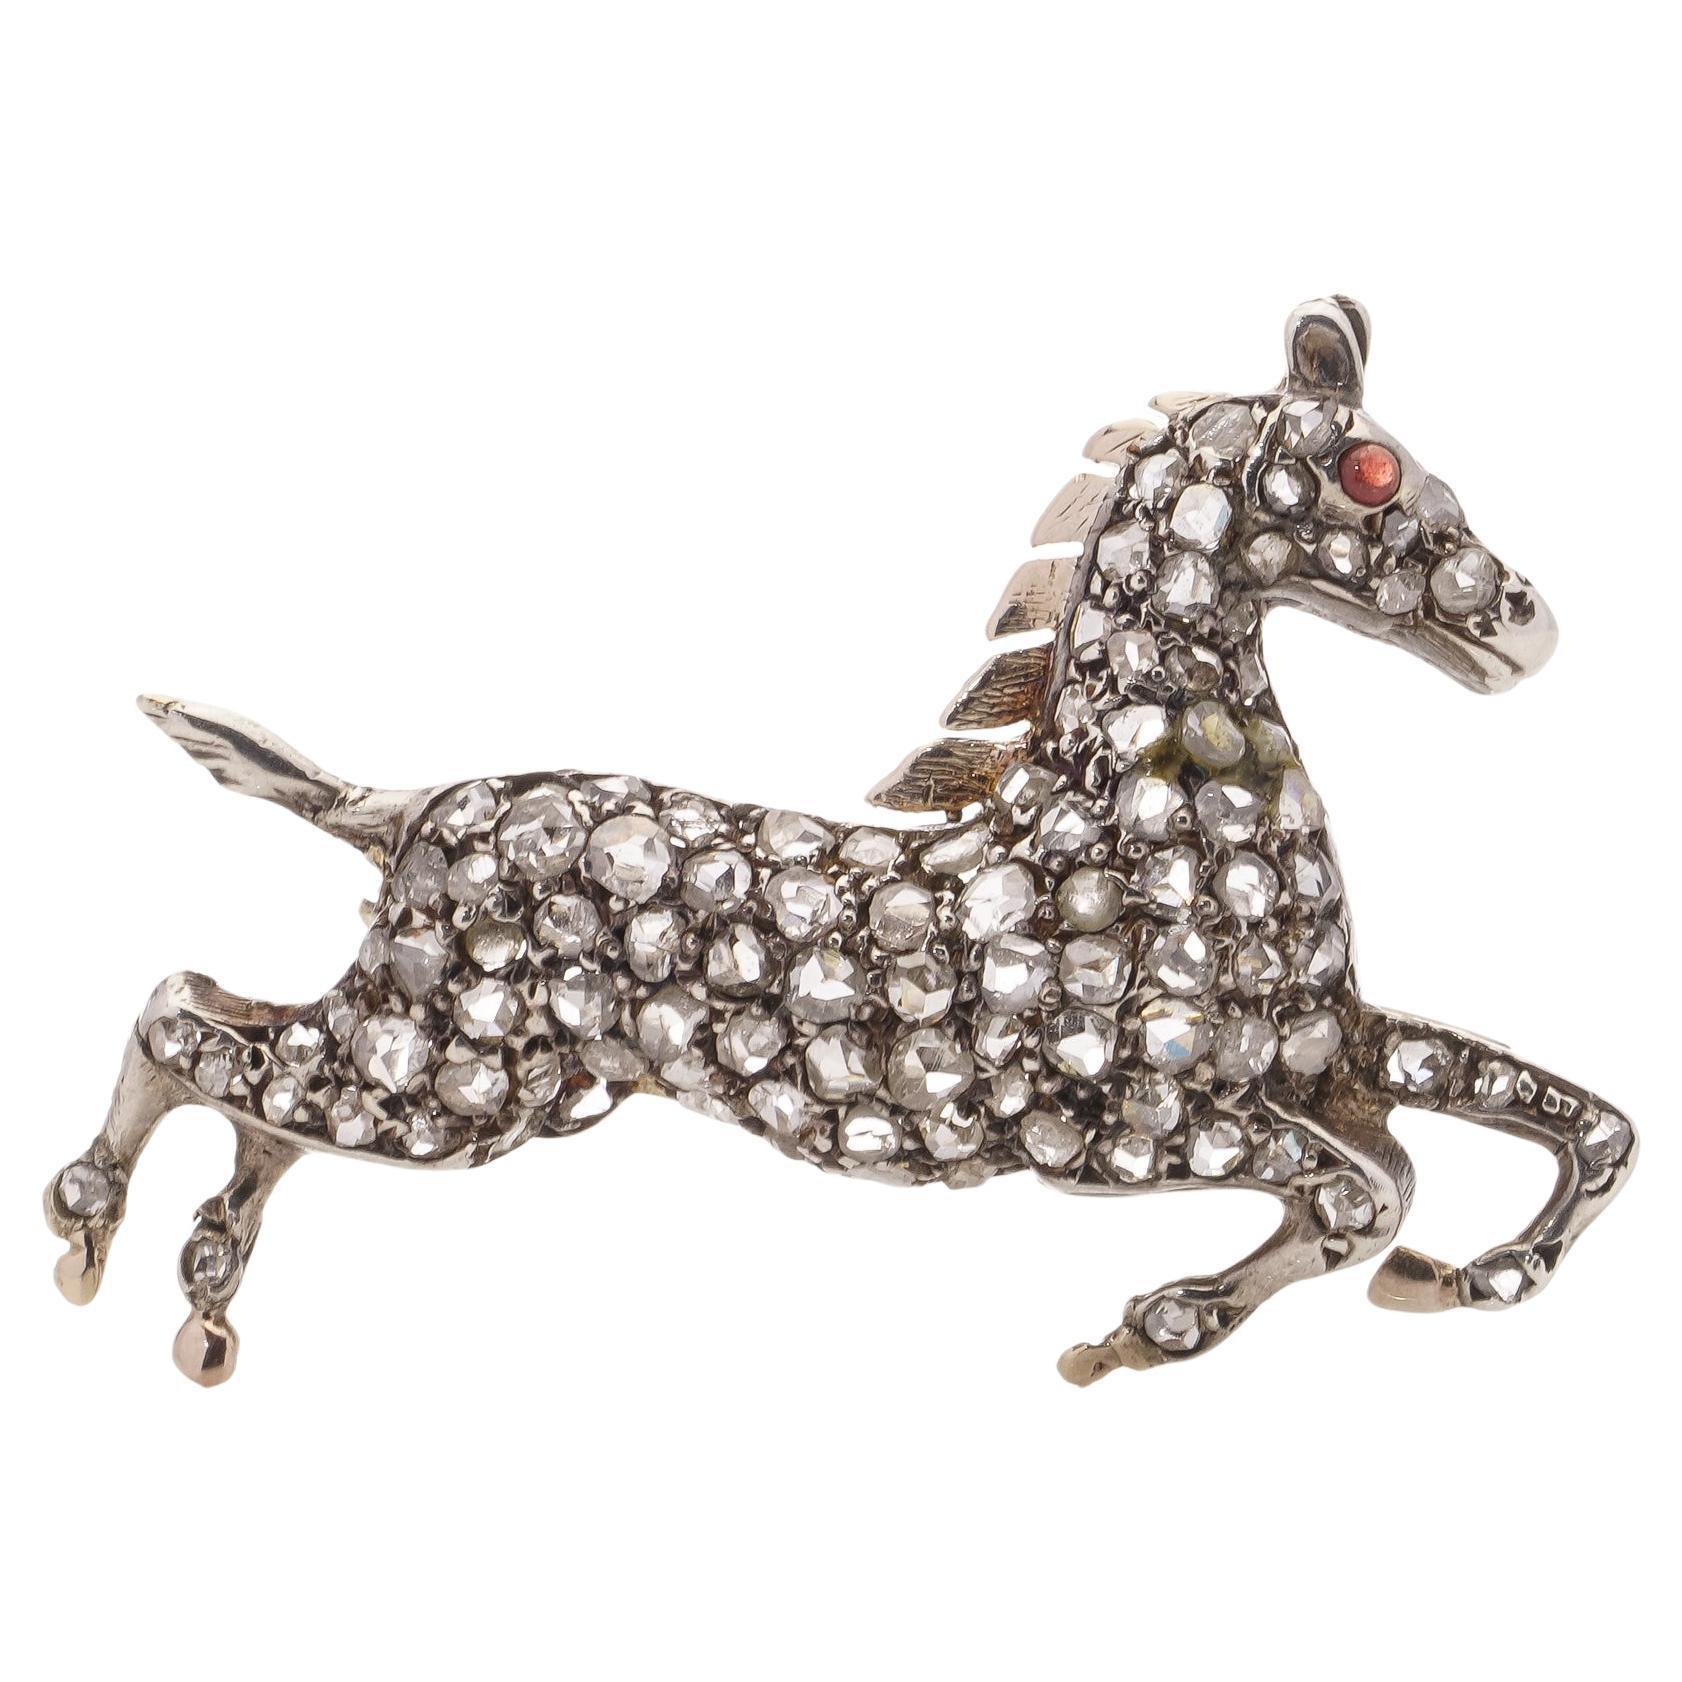 Victorian silver and 9kt gold plated back, horse brooch with rose cut diamonds